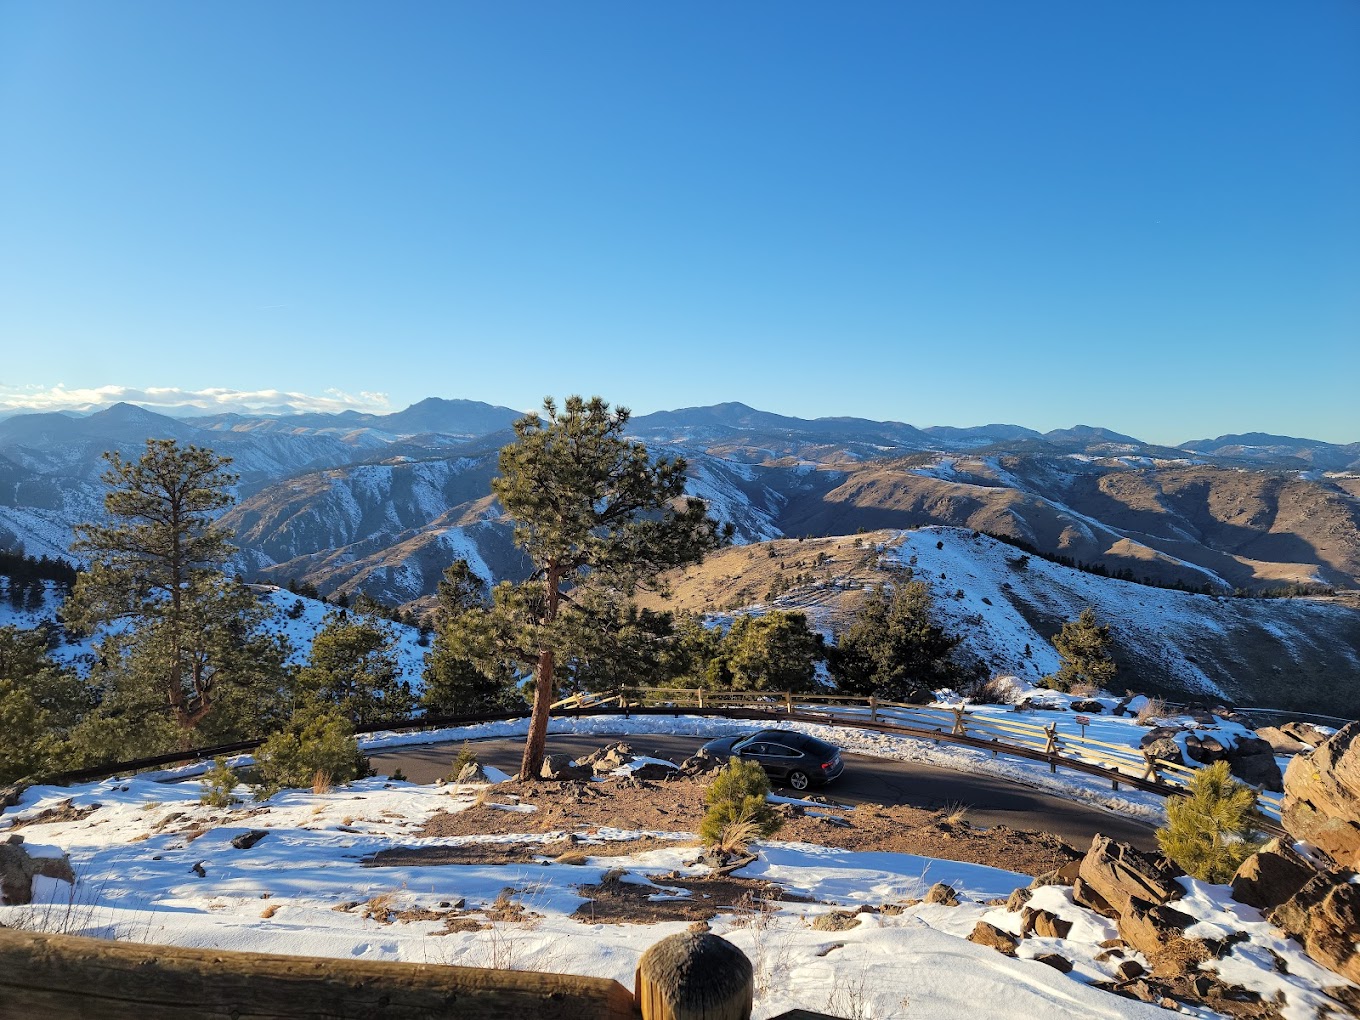 Hiking Lookout Mountain in Golden, Colorado and the best things to do on Lookout Mountain